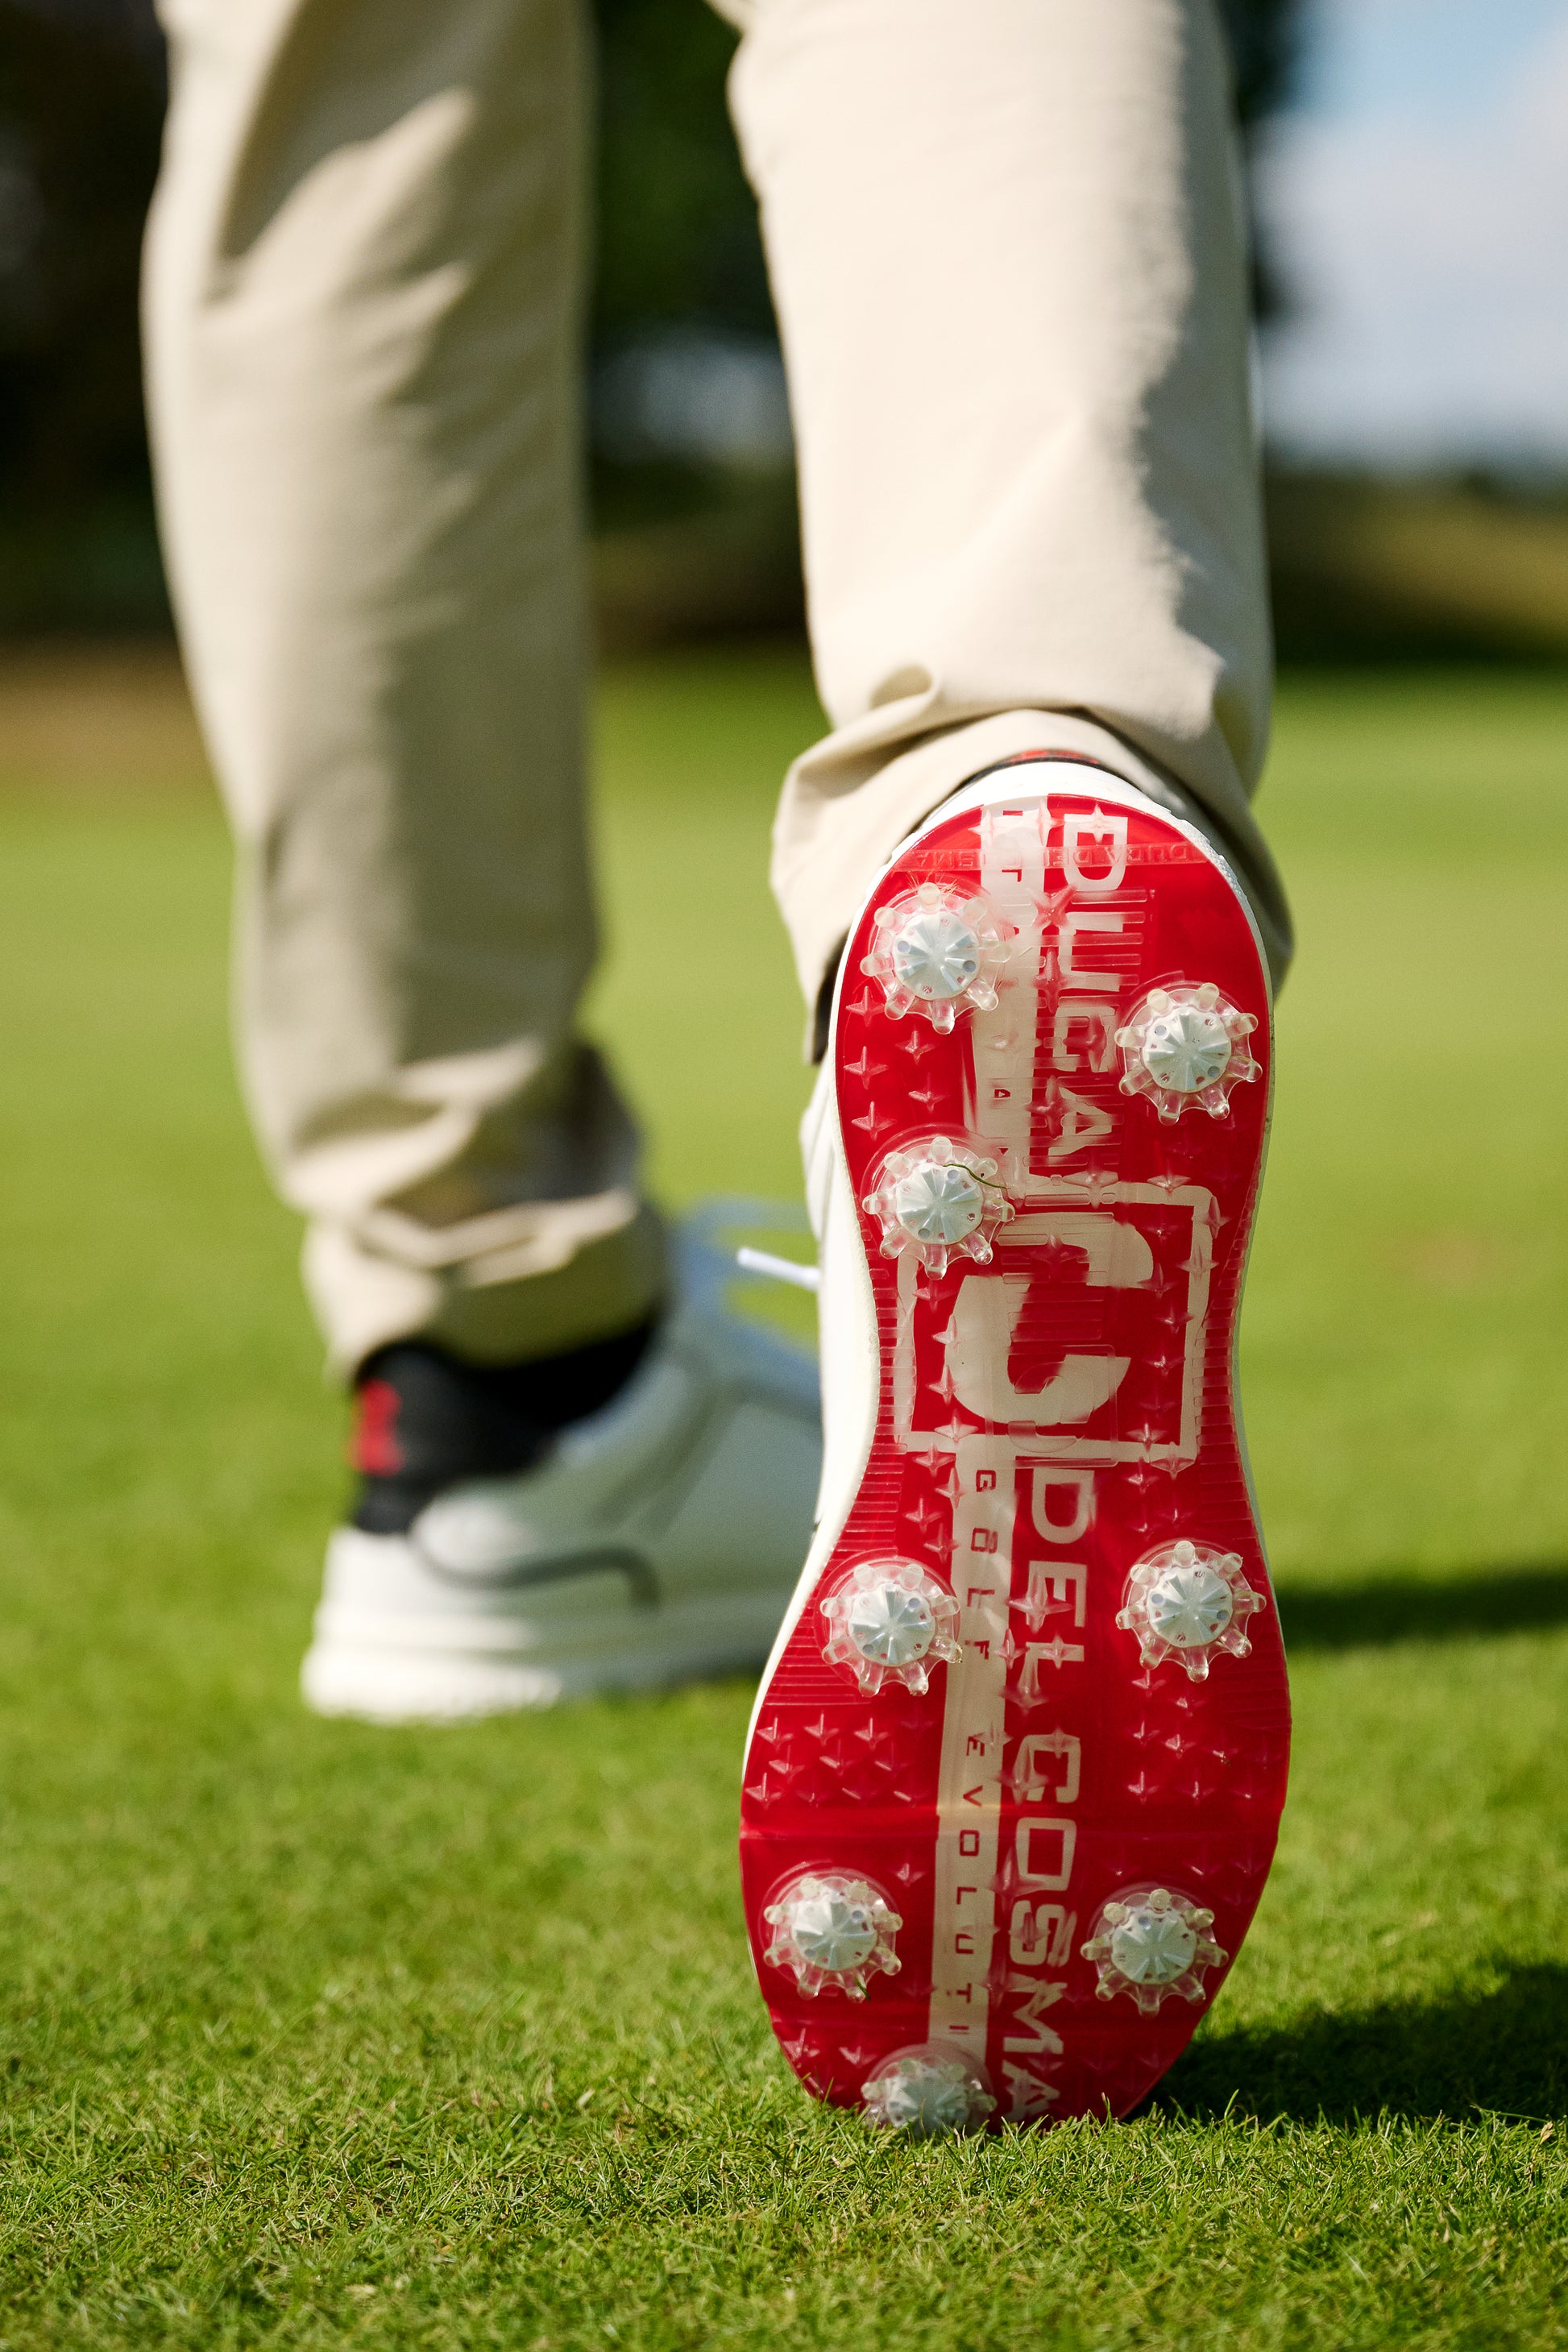 Orlando Pro Spike golf shoe for men. Professional golf shoe for on the golf course